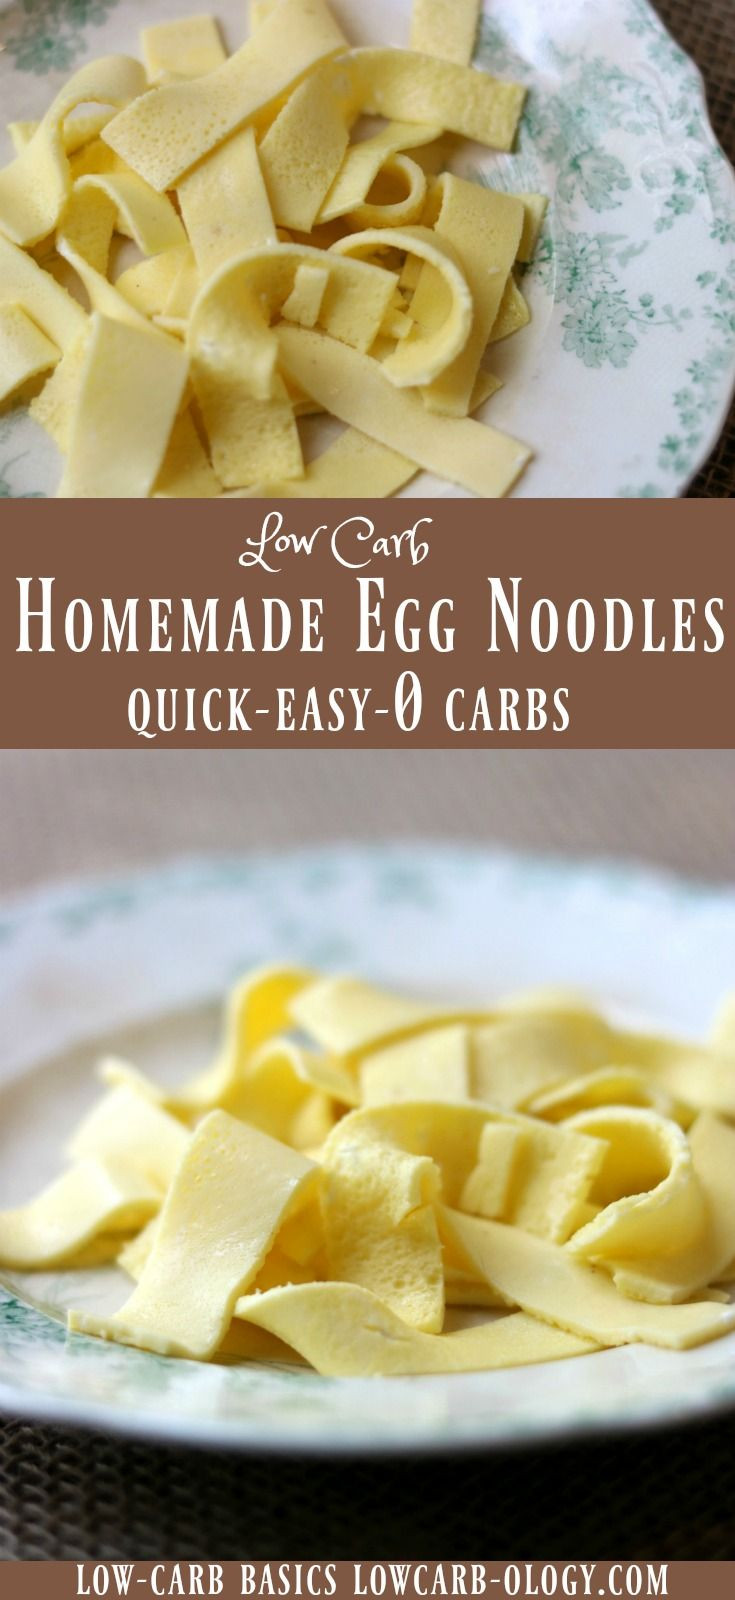 Carbs In Spaghetti Noodles
 Low Carb Egg Noodles How to Make Low Carb Pasta lowcarb